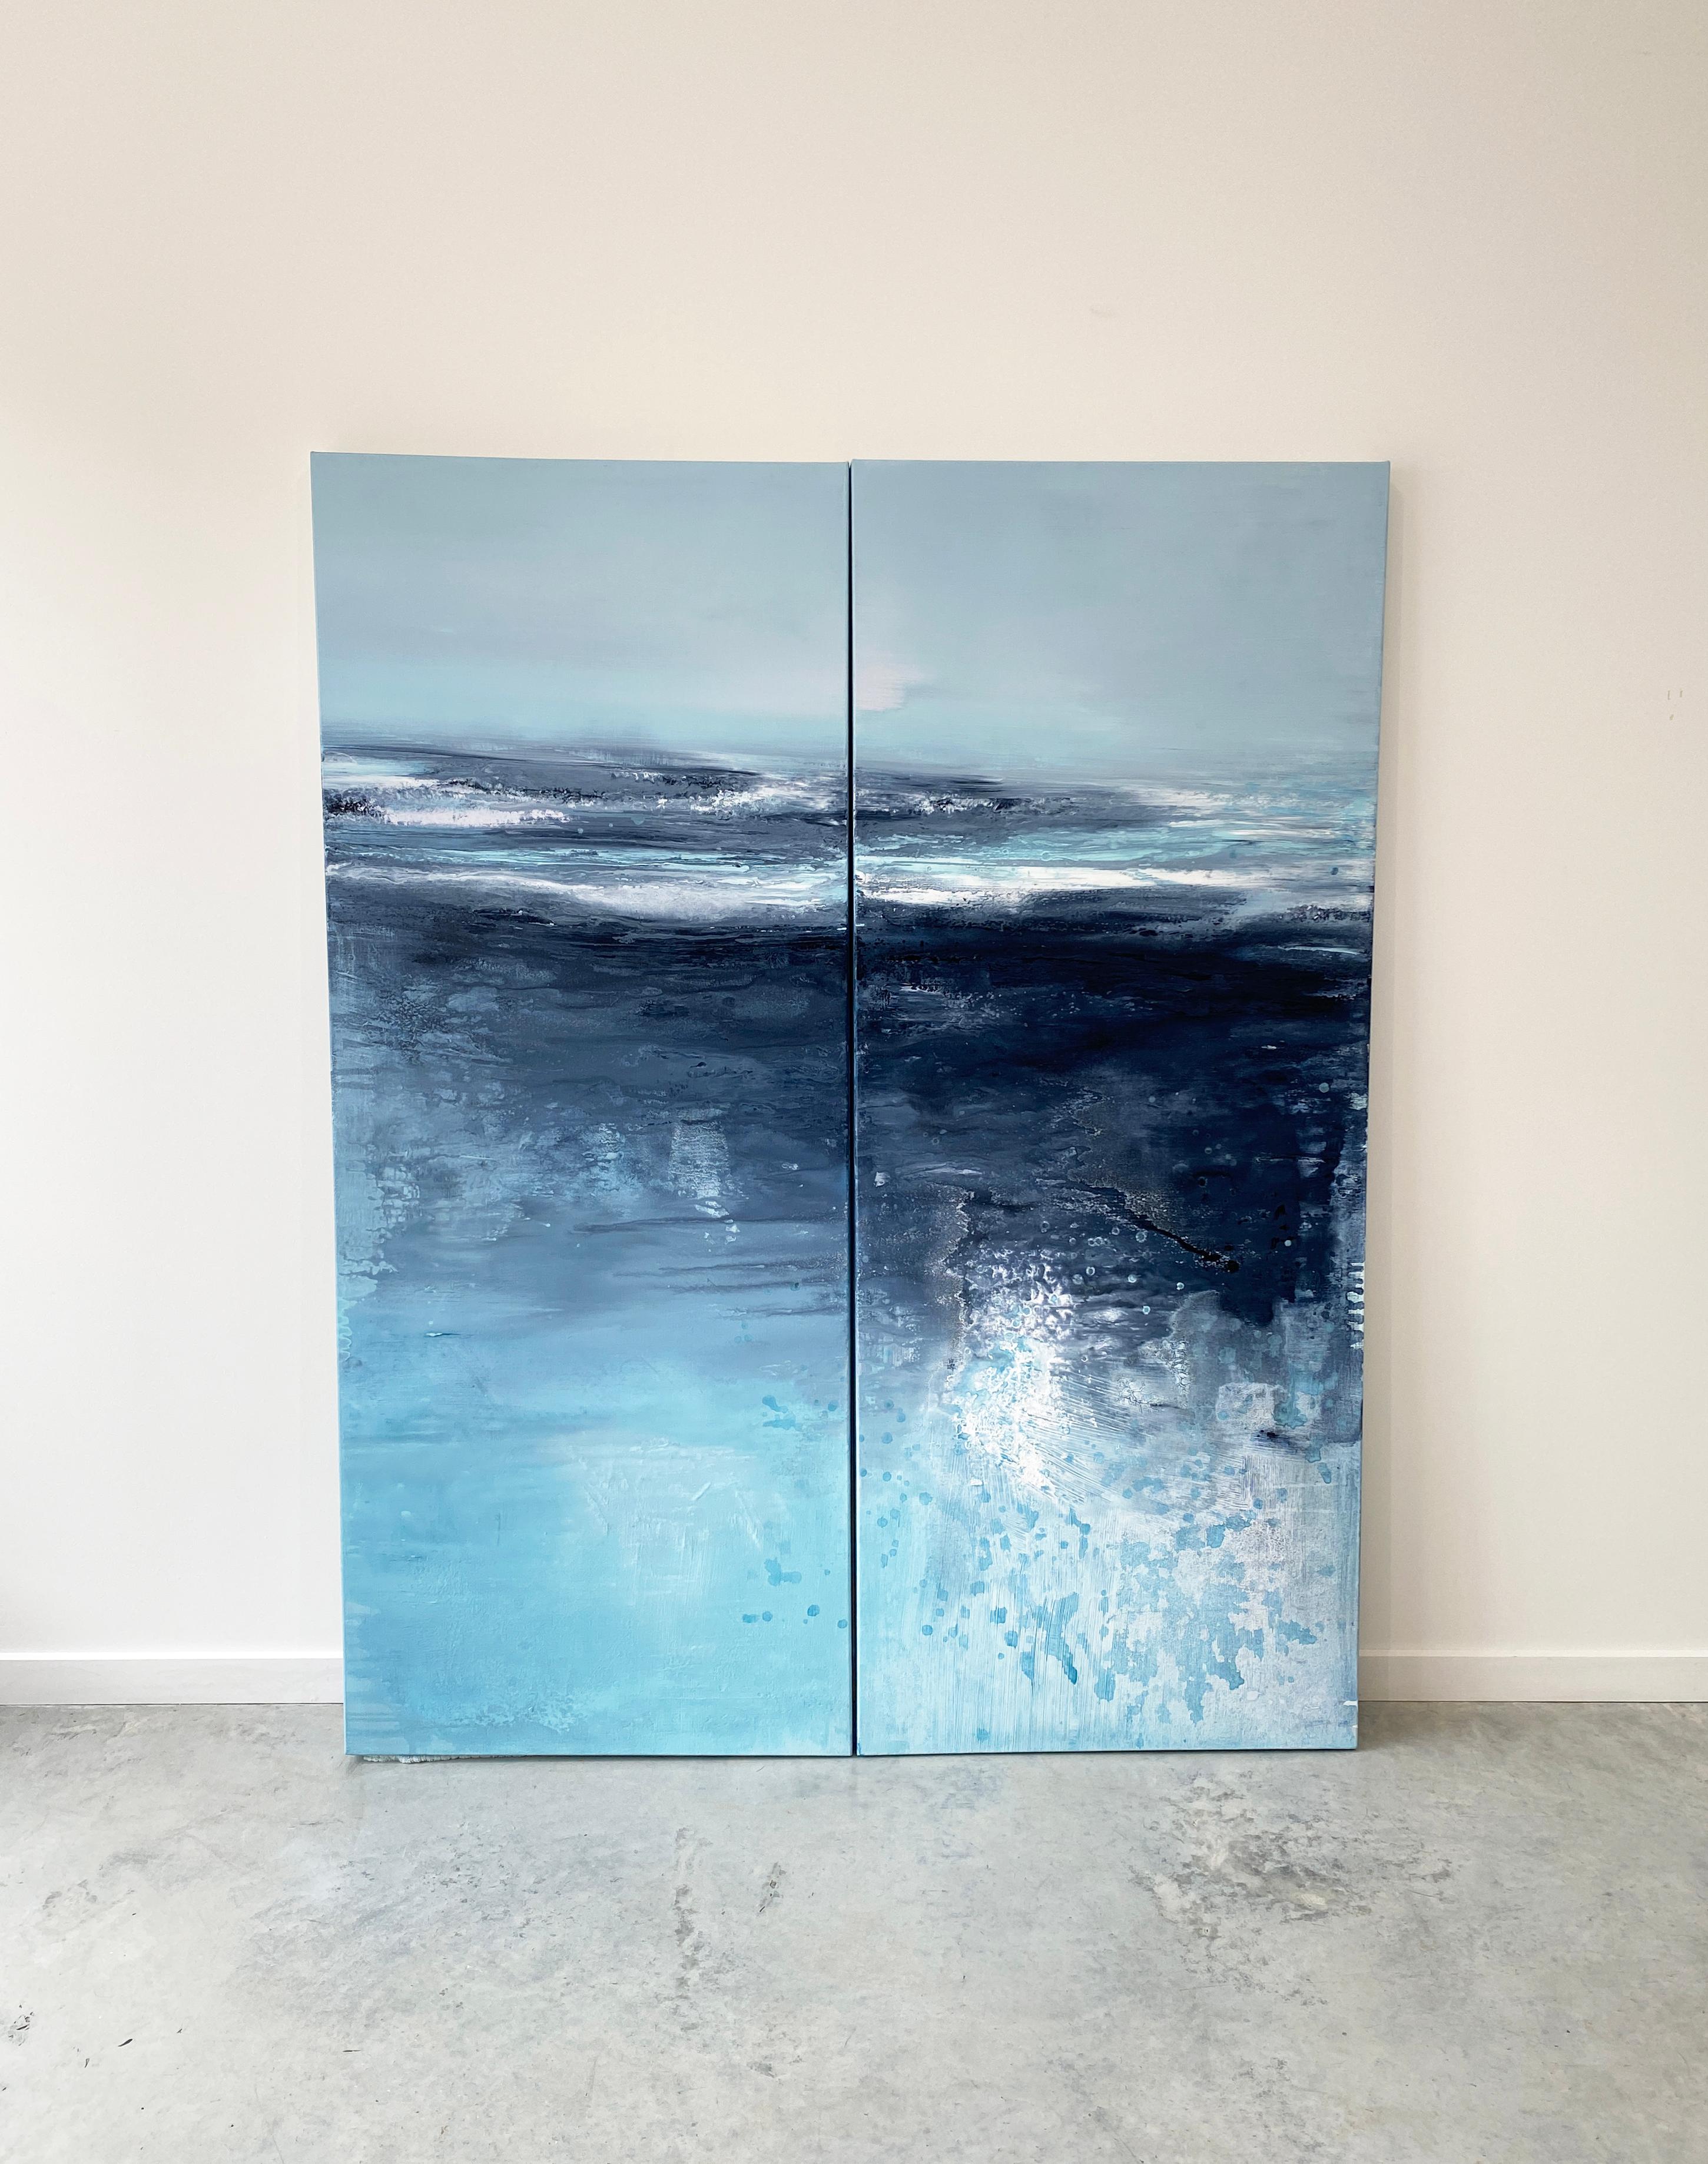 Aqua Waters at Night large scale double panel abstract expressionist painting - Abstract Expressionist Painting by Kathleen Rhee